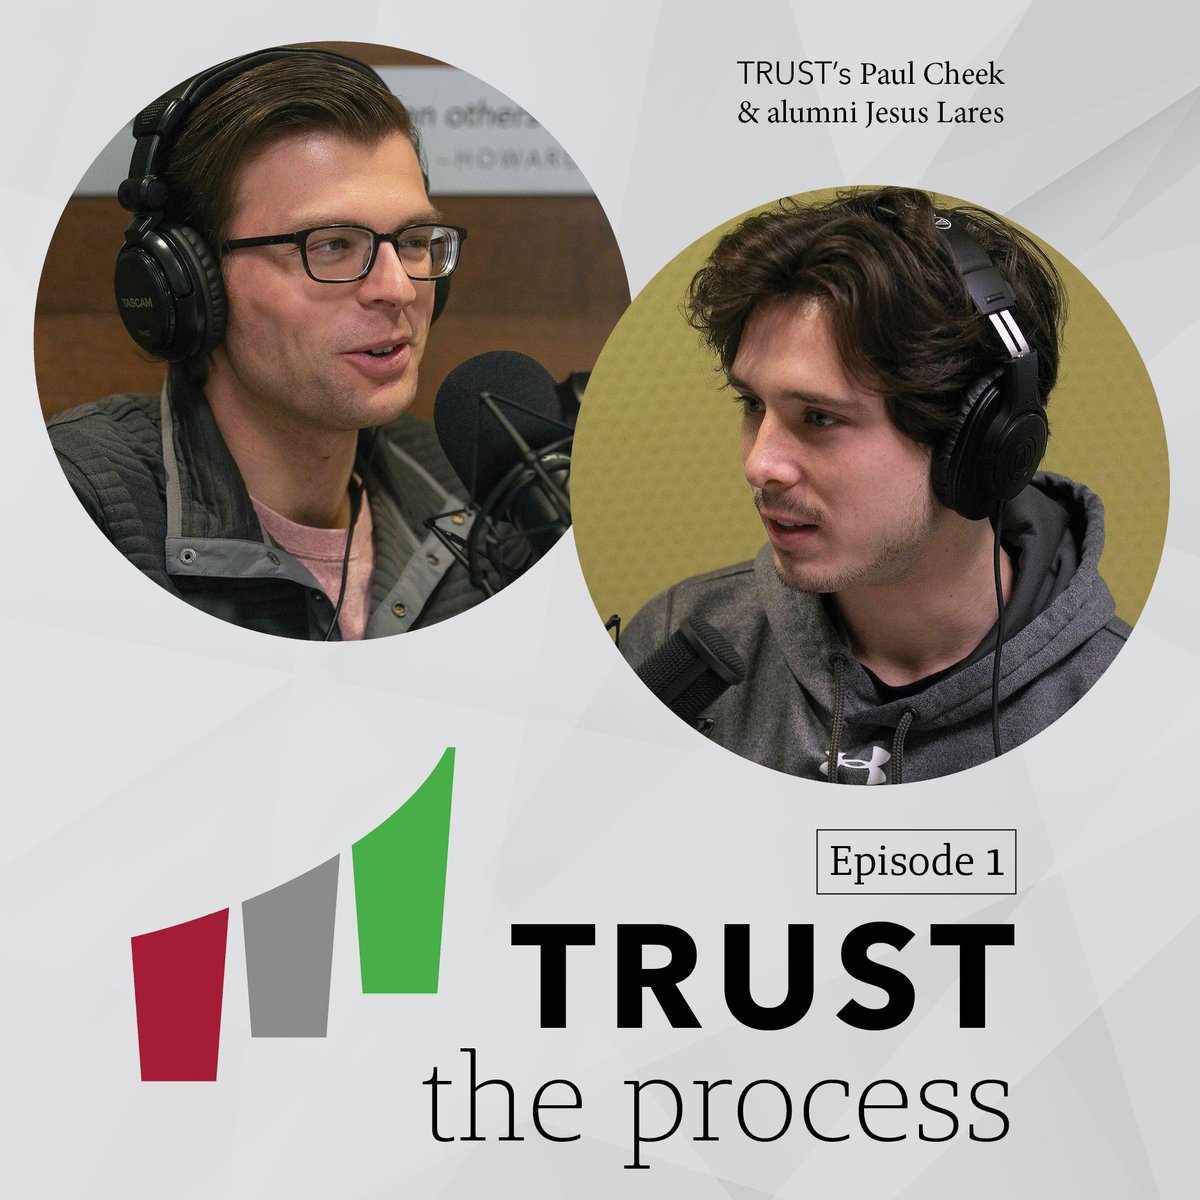 It's our brand new podcast Trust the Process! Conversations w/ MIT students, alumni, staff, friends & more discussing their diverse entrepreneurial journeys and MIT's impact on where they are today. Ep 1 features Jesus Lares of Eraverse. Enjoy & subscribe entrepreneurship.mit.edu/podcast/